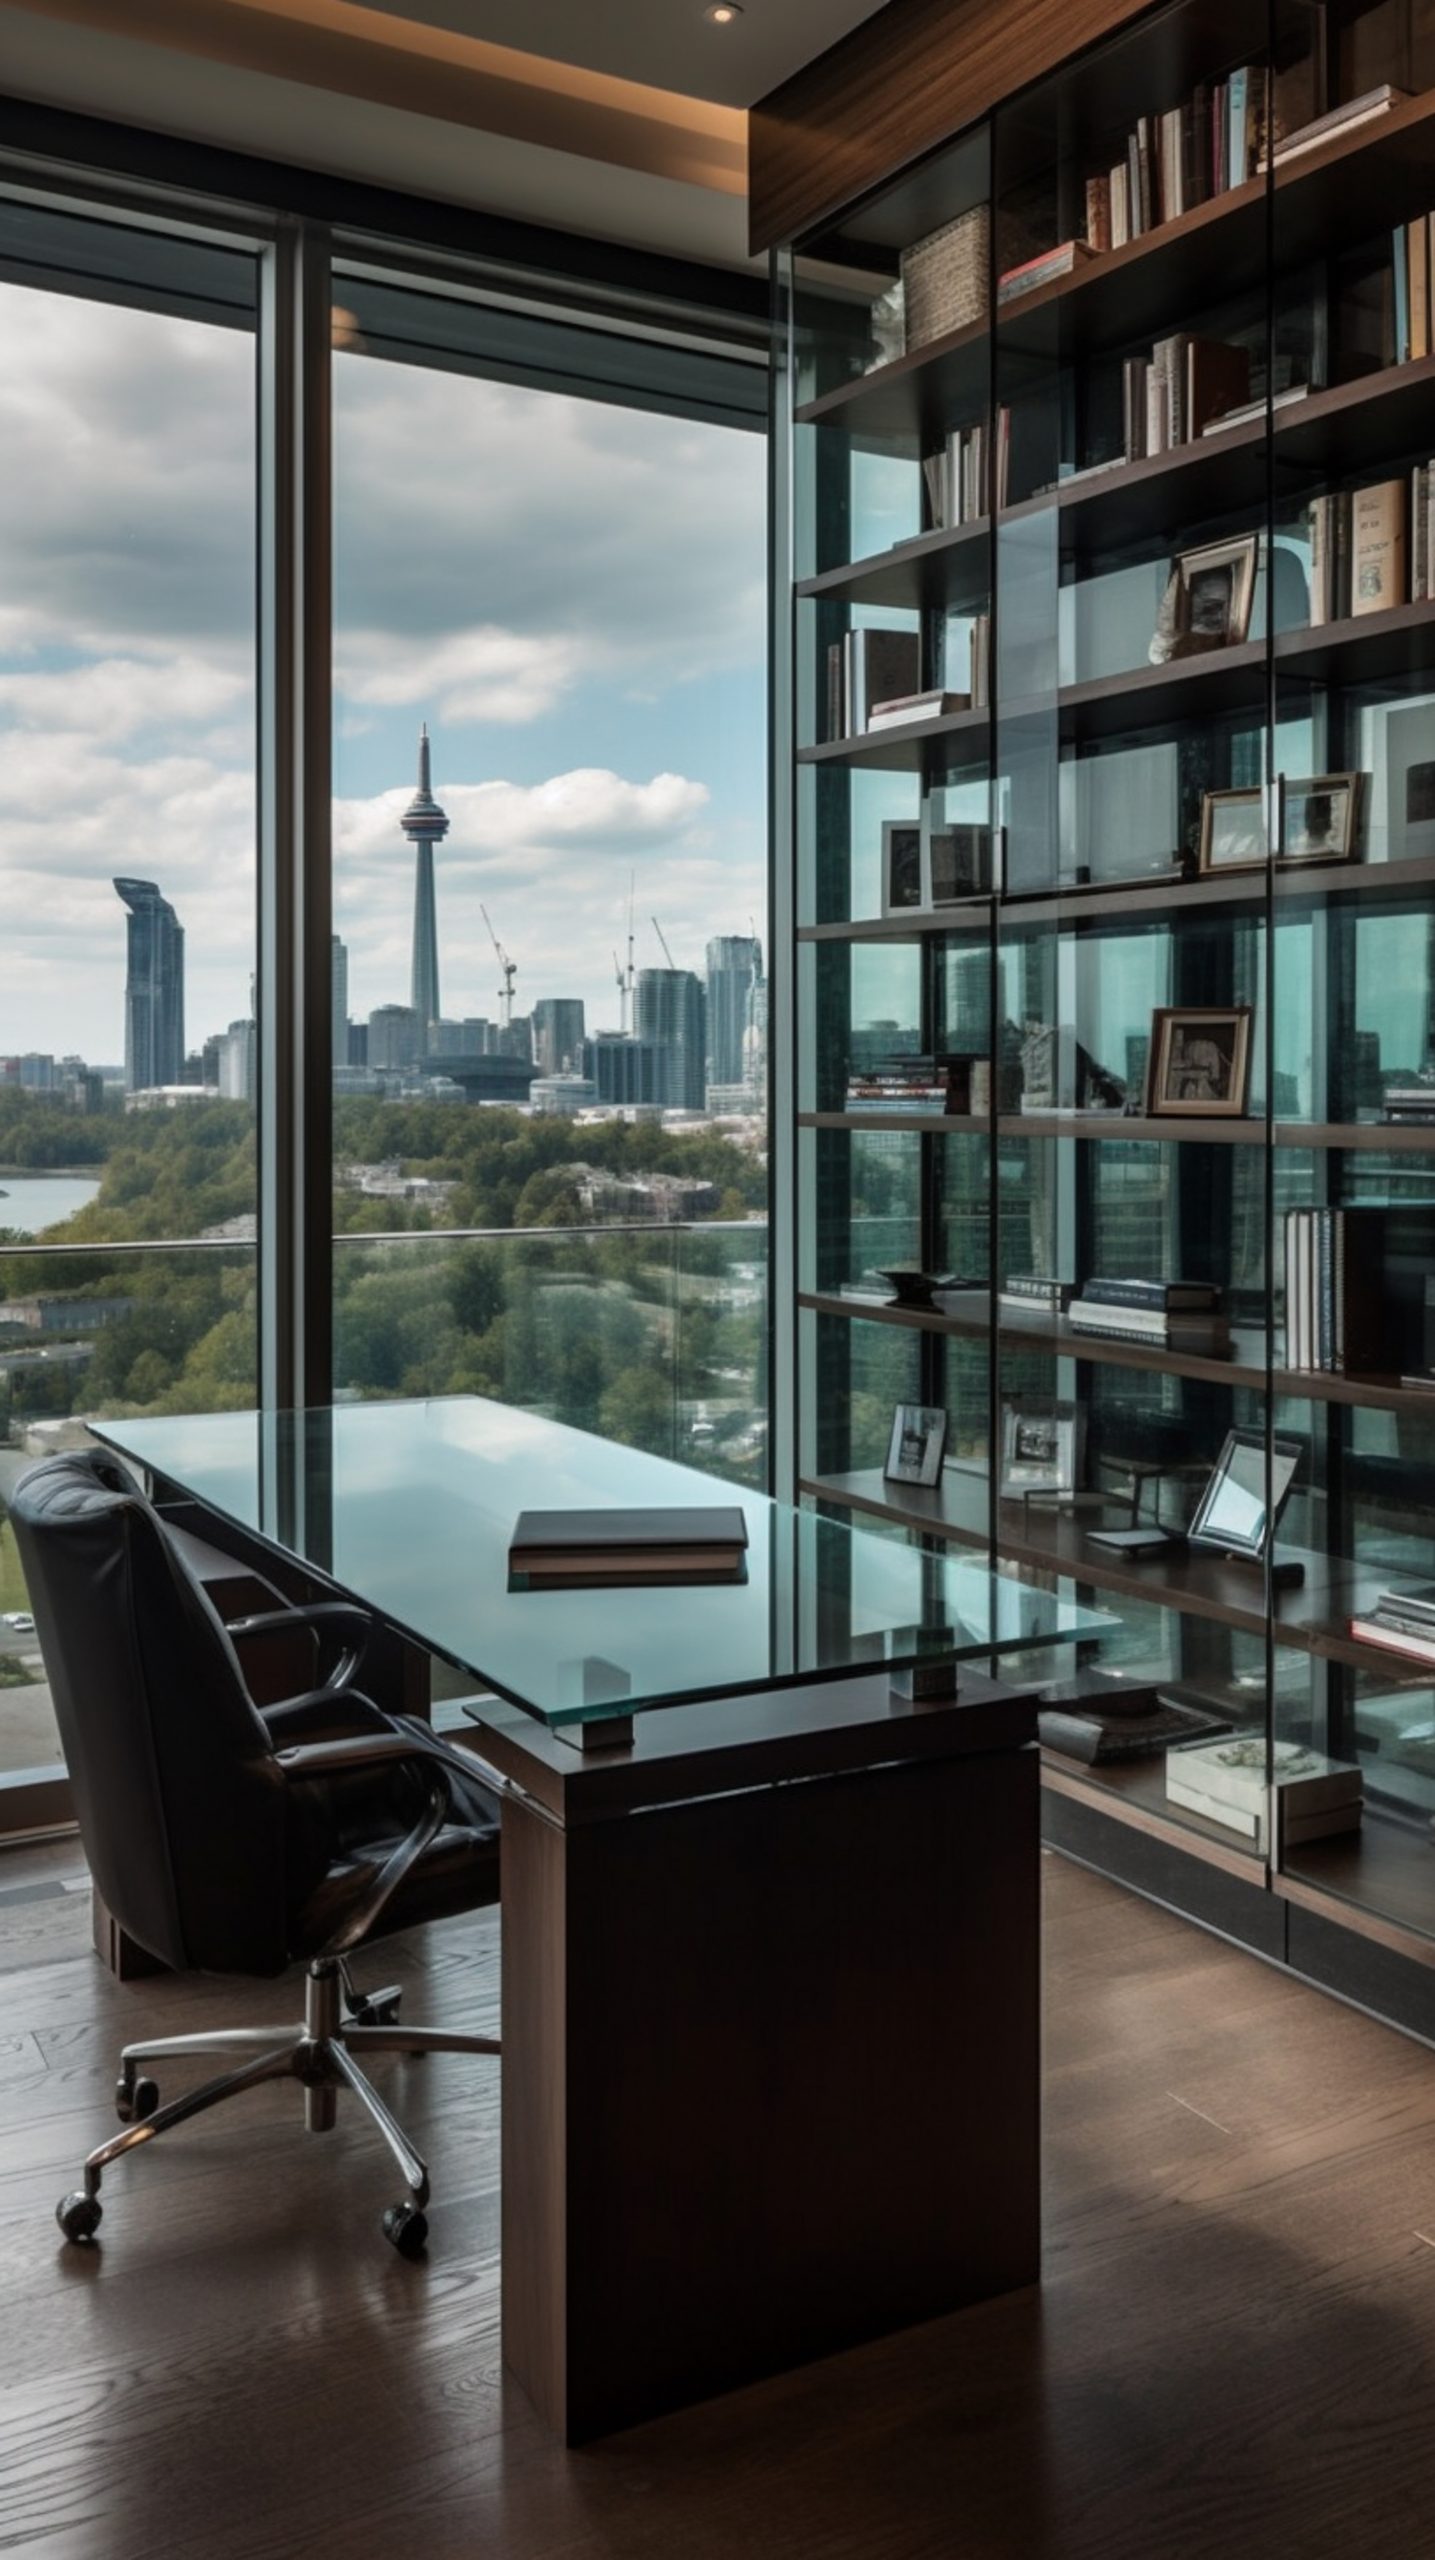 desk-home-office-with-view-city-skyline-scaled Expand your Amazon Business to Europe